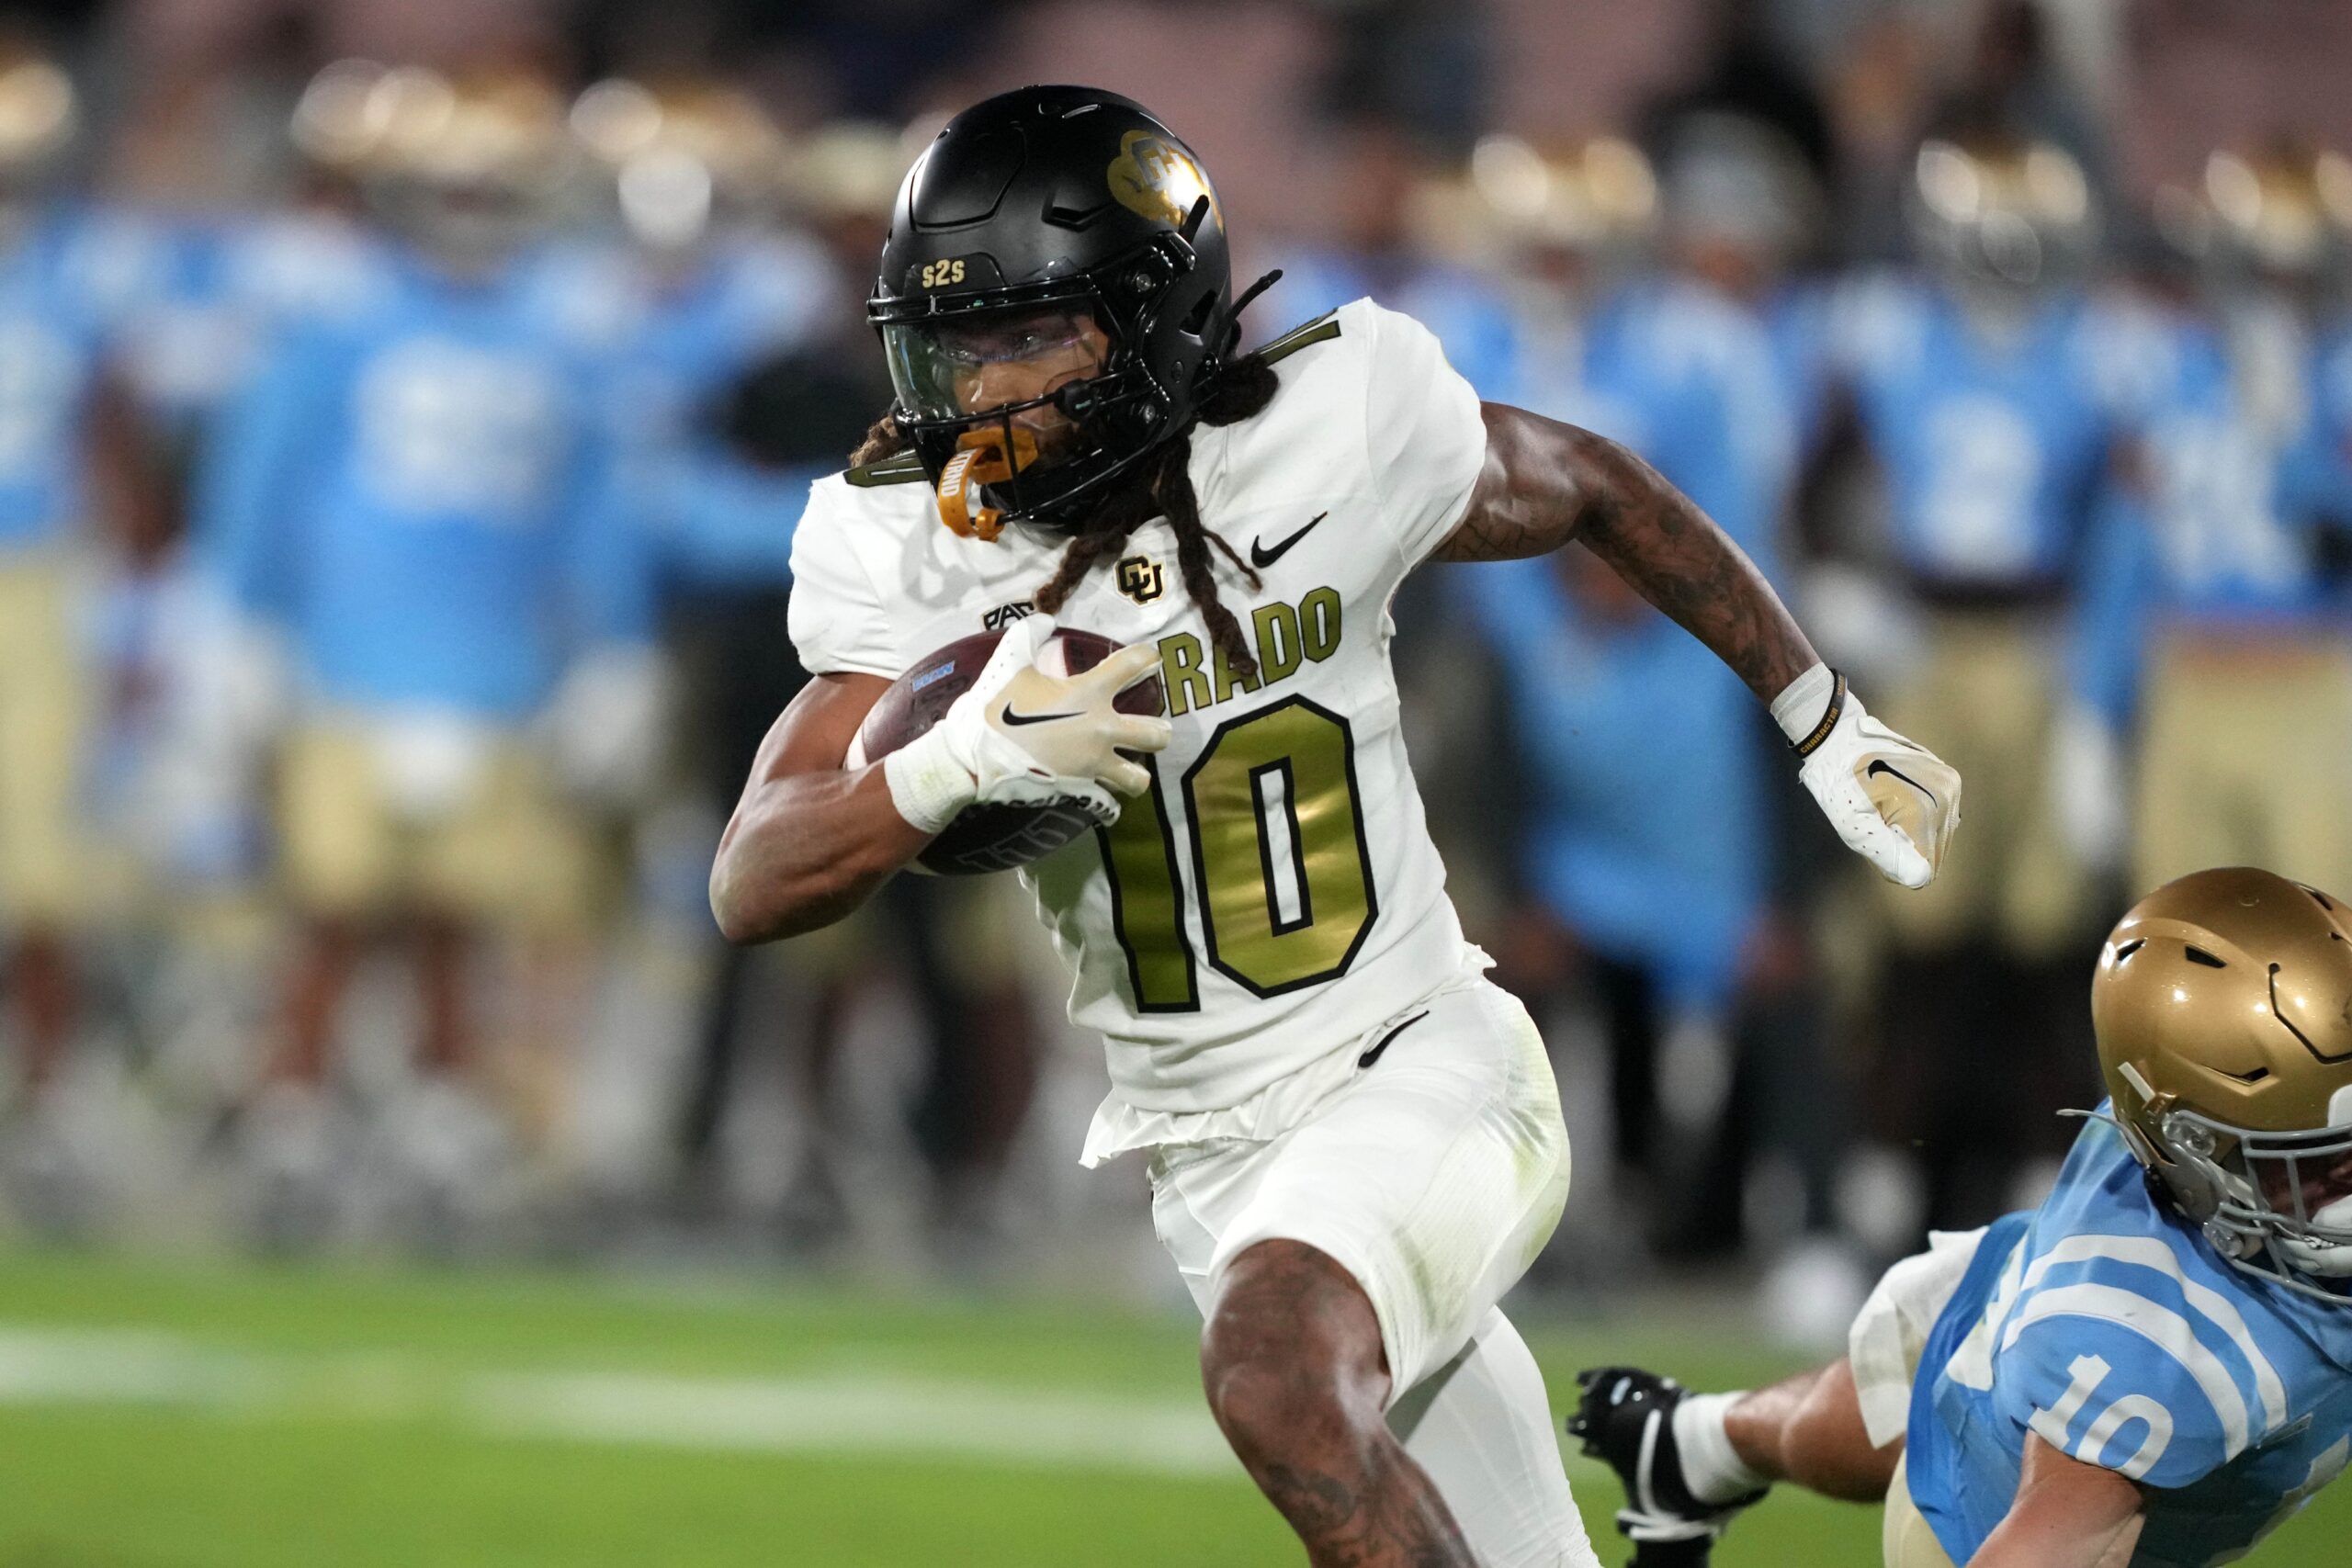 Colorado Buffaloes wide receiver Xavier Weaver (10) carries the ball against the UCLA Bruins in the second half at Rose Bowl. UCLA defeated Colorado 28-16. Mandatory Credit: Kirby Lee-USA TODAY Sports